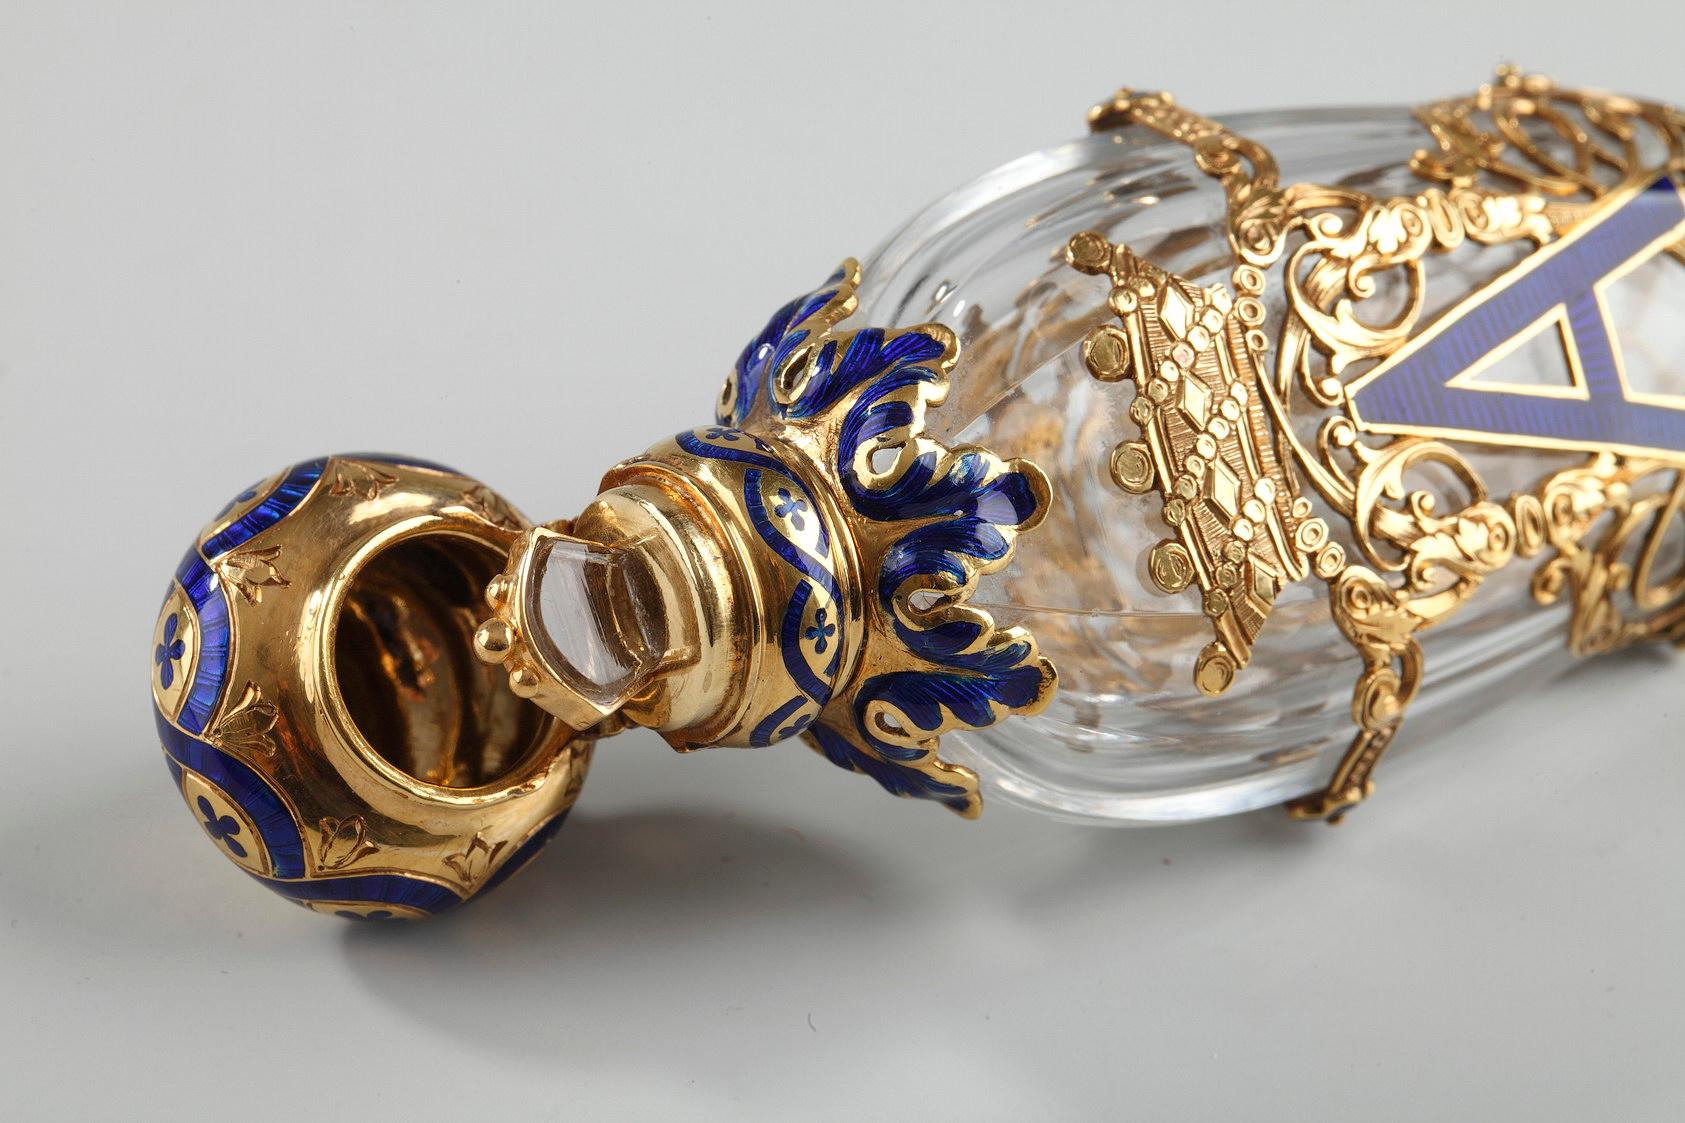 Napoleon III Exceptional Crystal Flask with Enameled Gold Box, Late 19th Century For Sale